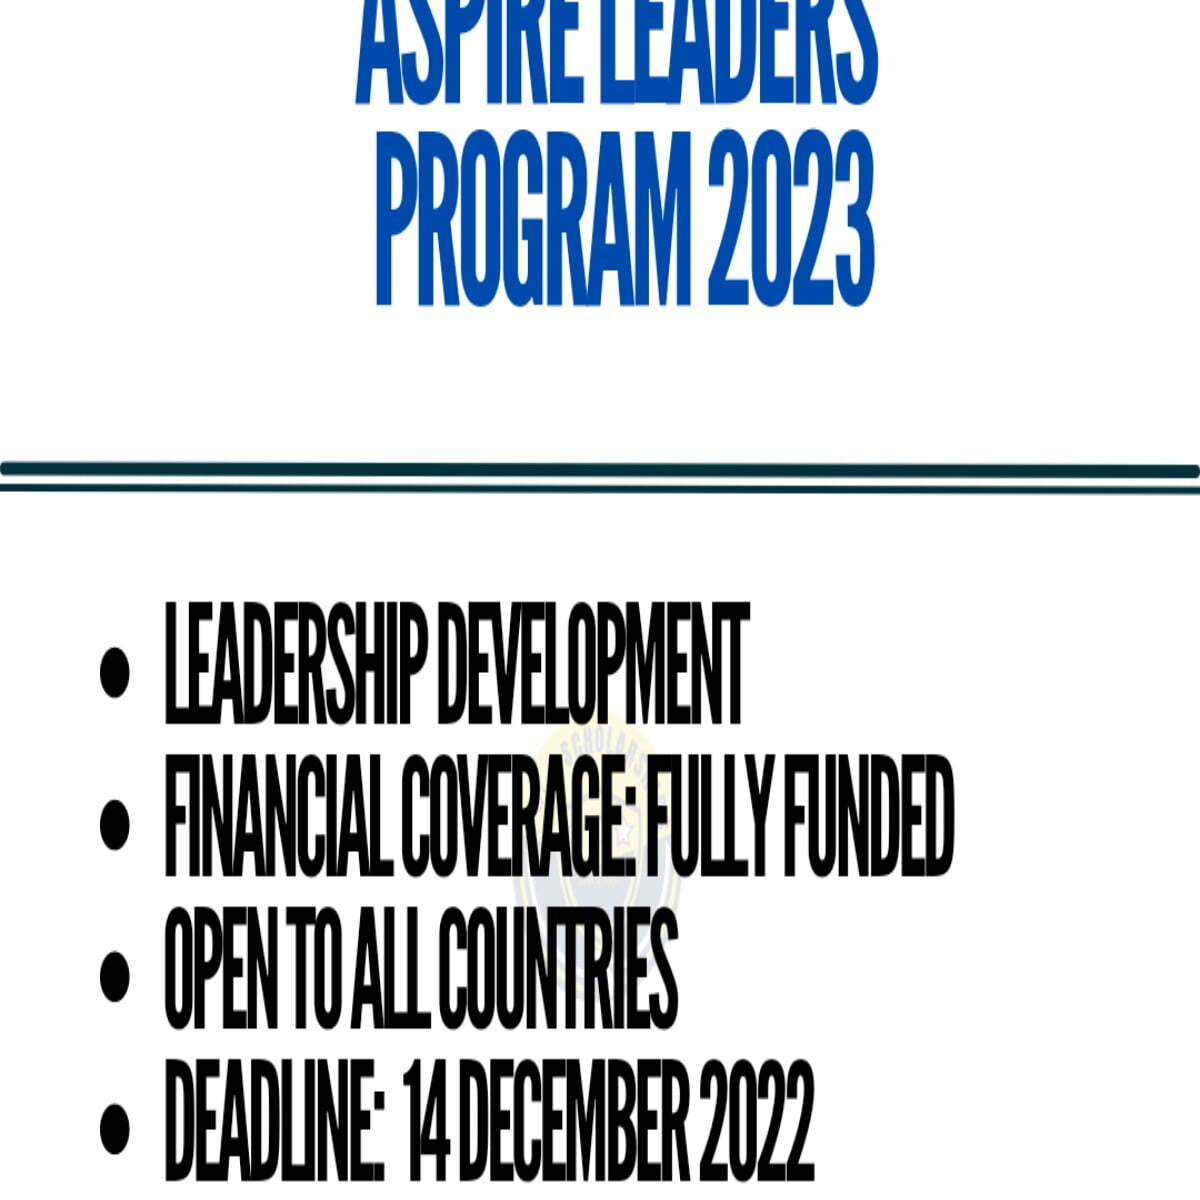 The Aspire Leaders Program for Students and Recent Graduates 2023